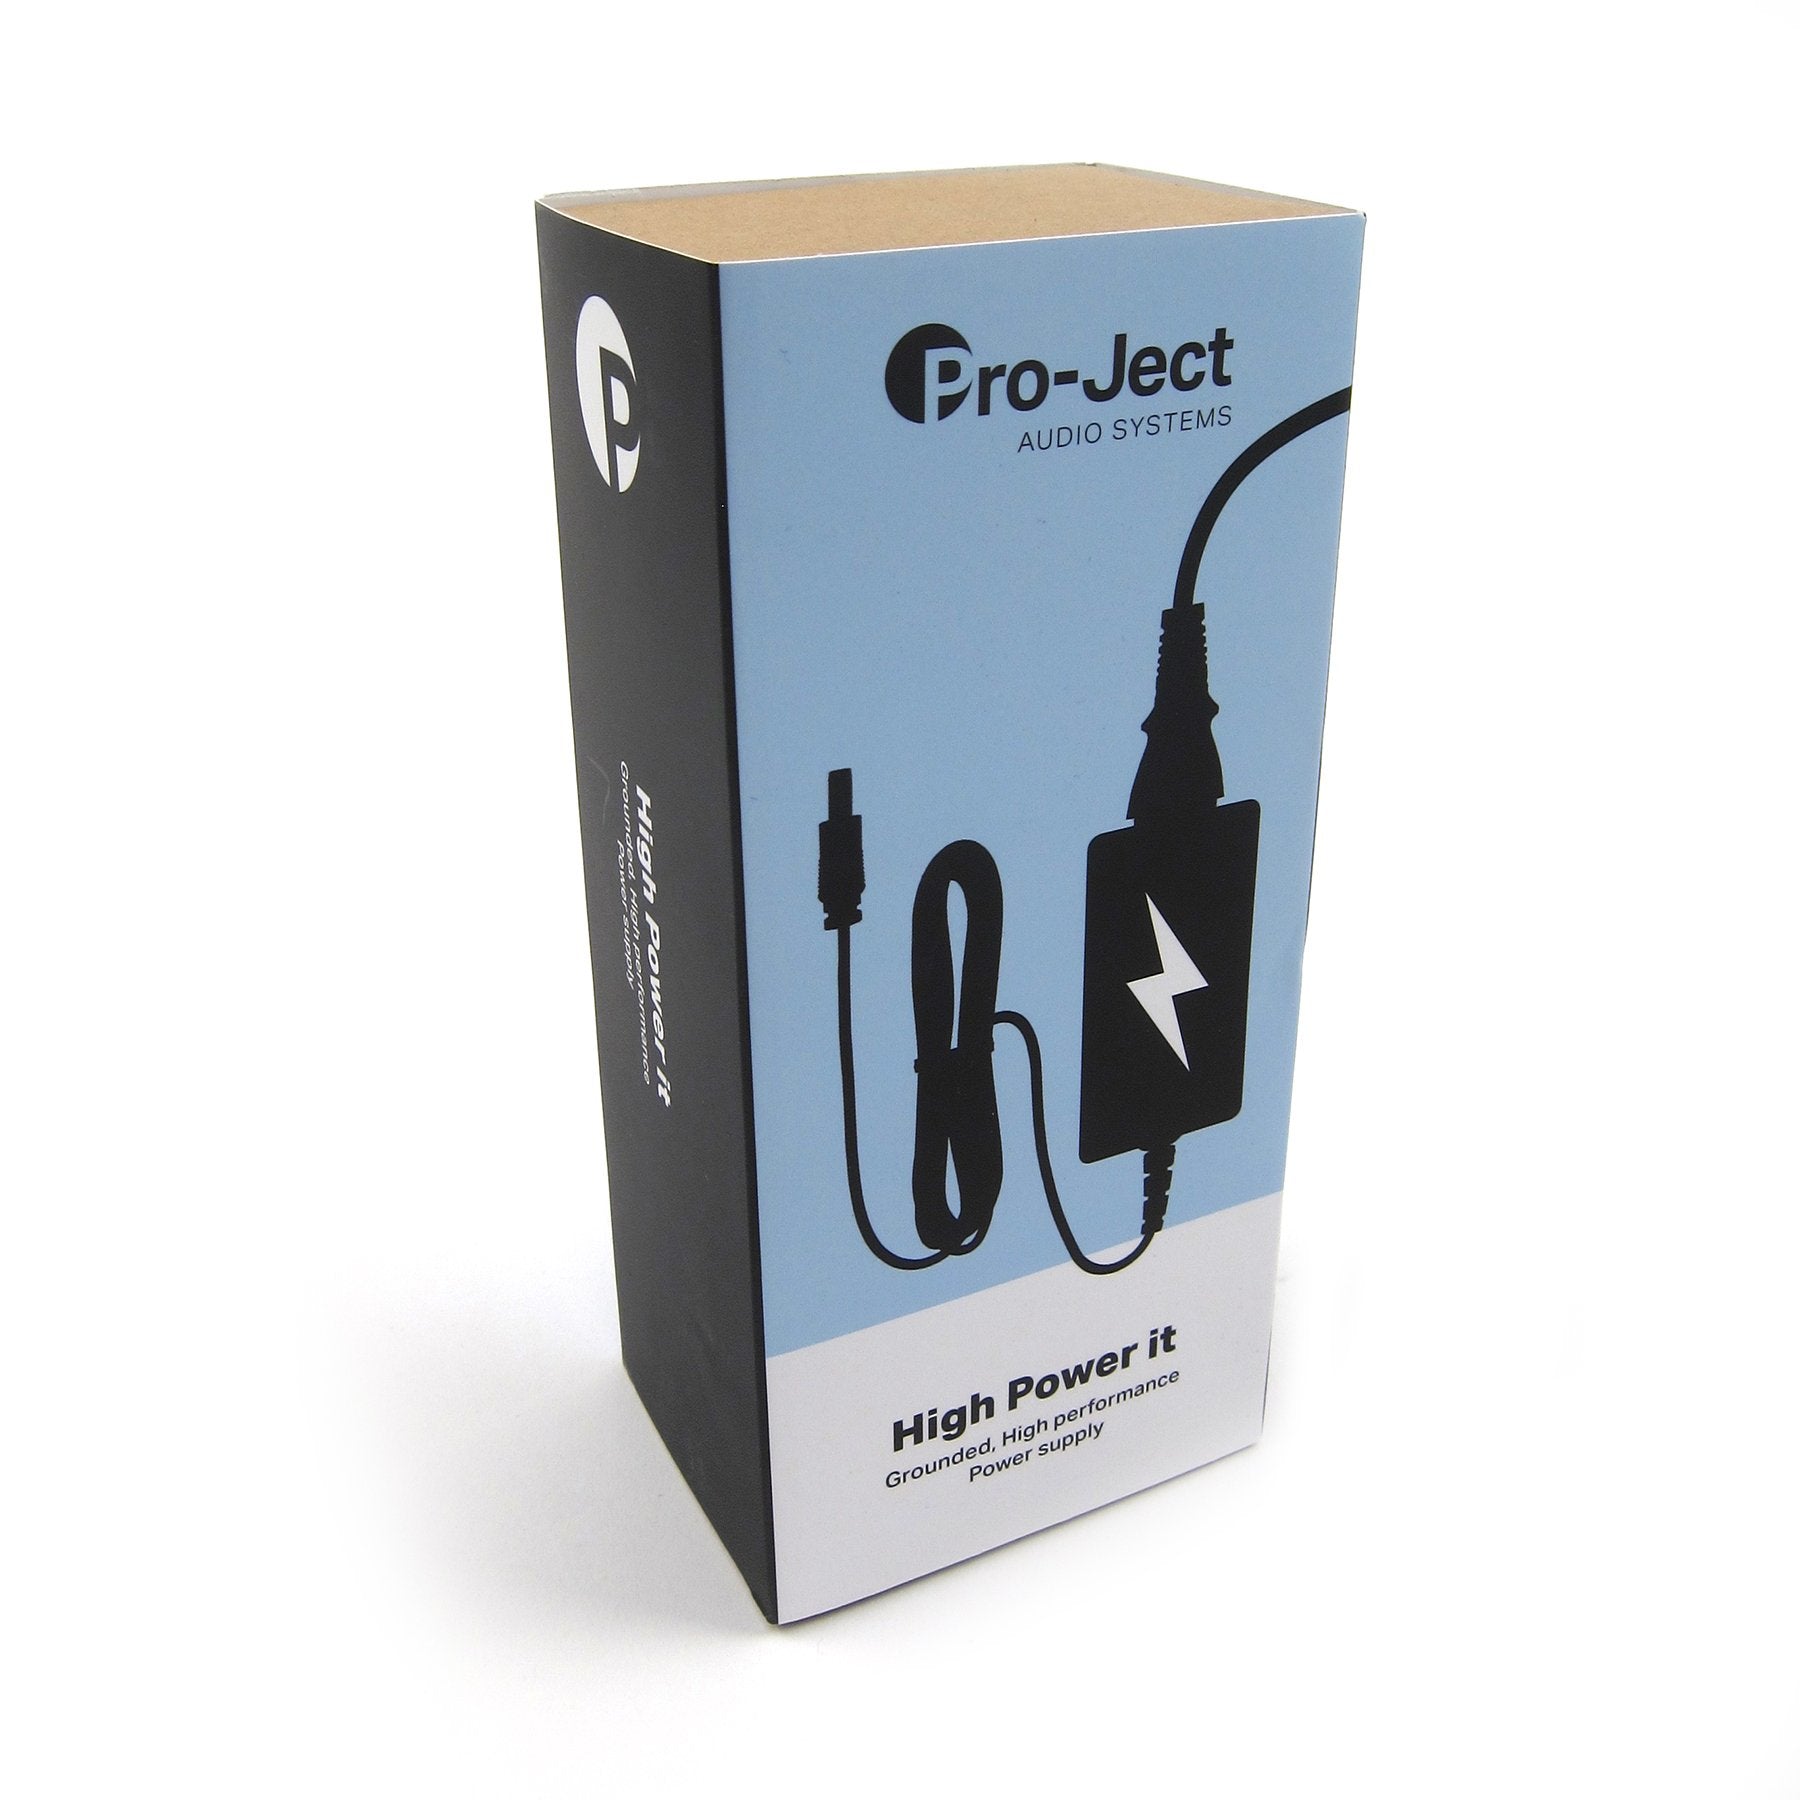 Pro-Ject: High Power-It Grounded Power Cable for DC Turntables